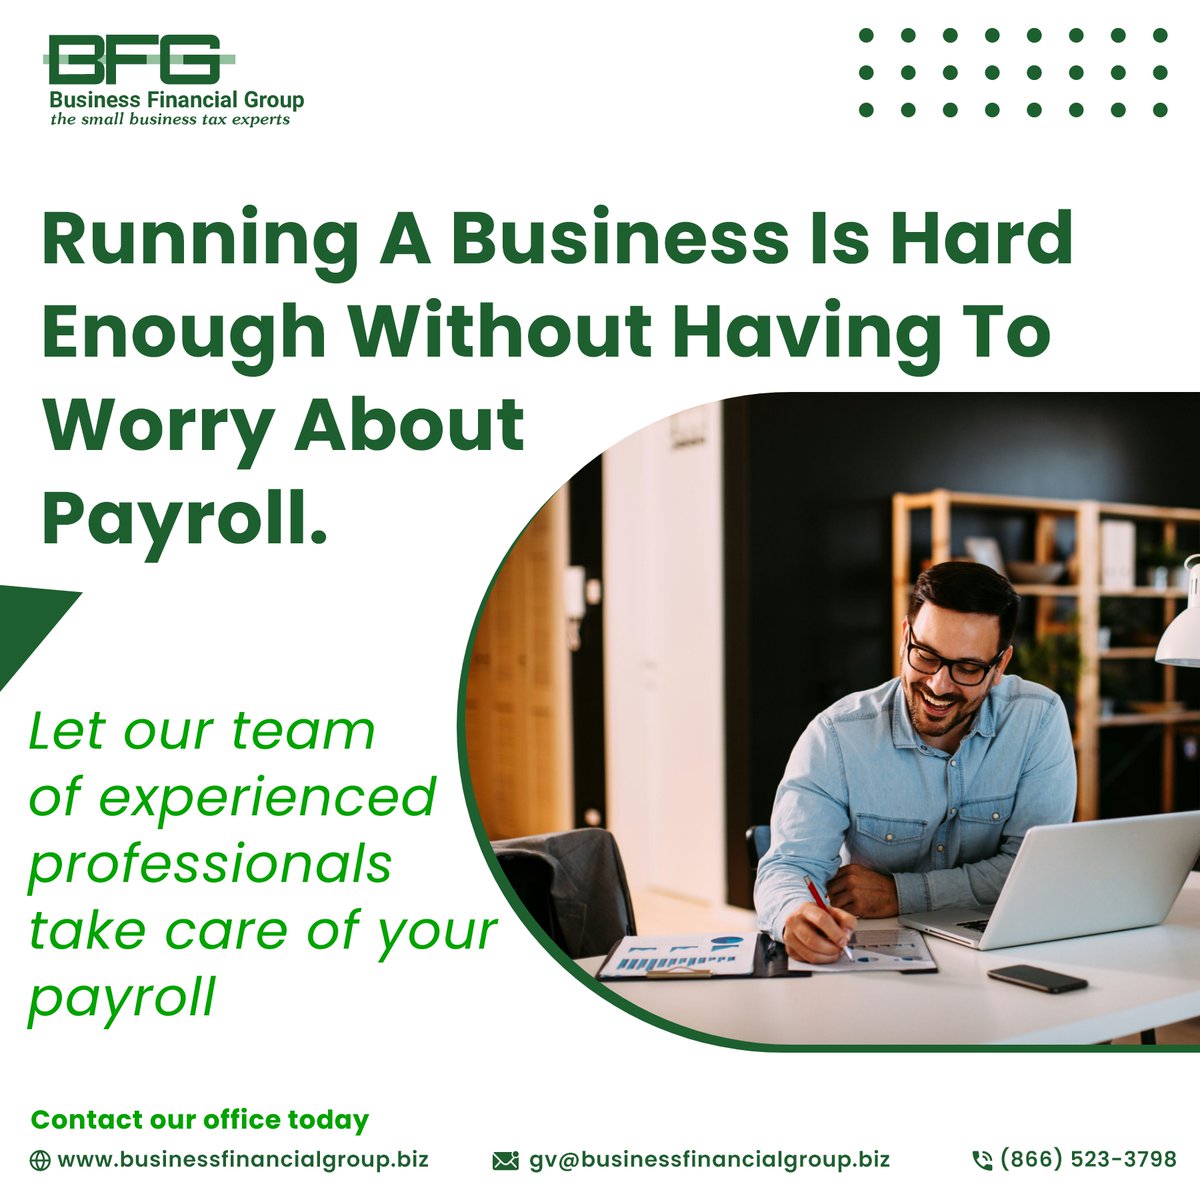 'Running a business is hard enough without having to worry about payroll. Let our team of experienced professionals take care of your payroll needs, so you can focus on what you do best.

#payrollexpert #businessgrowth #PayrollServices #Reliable #Accurate #PayrollProcessing